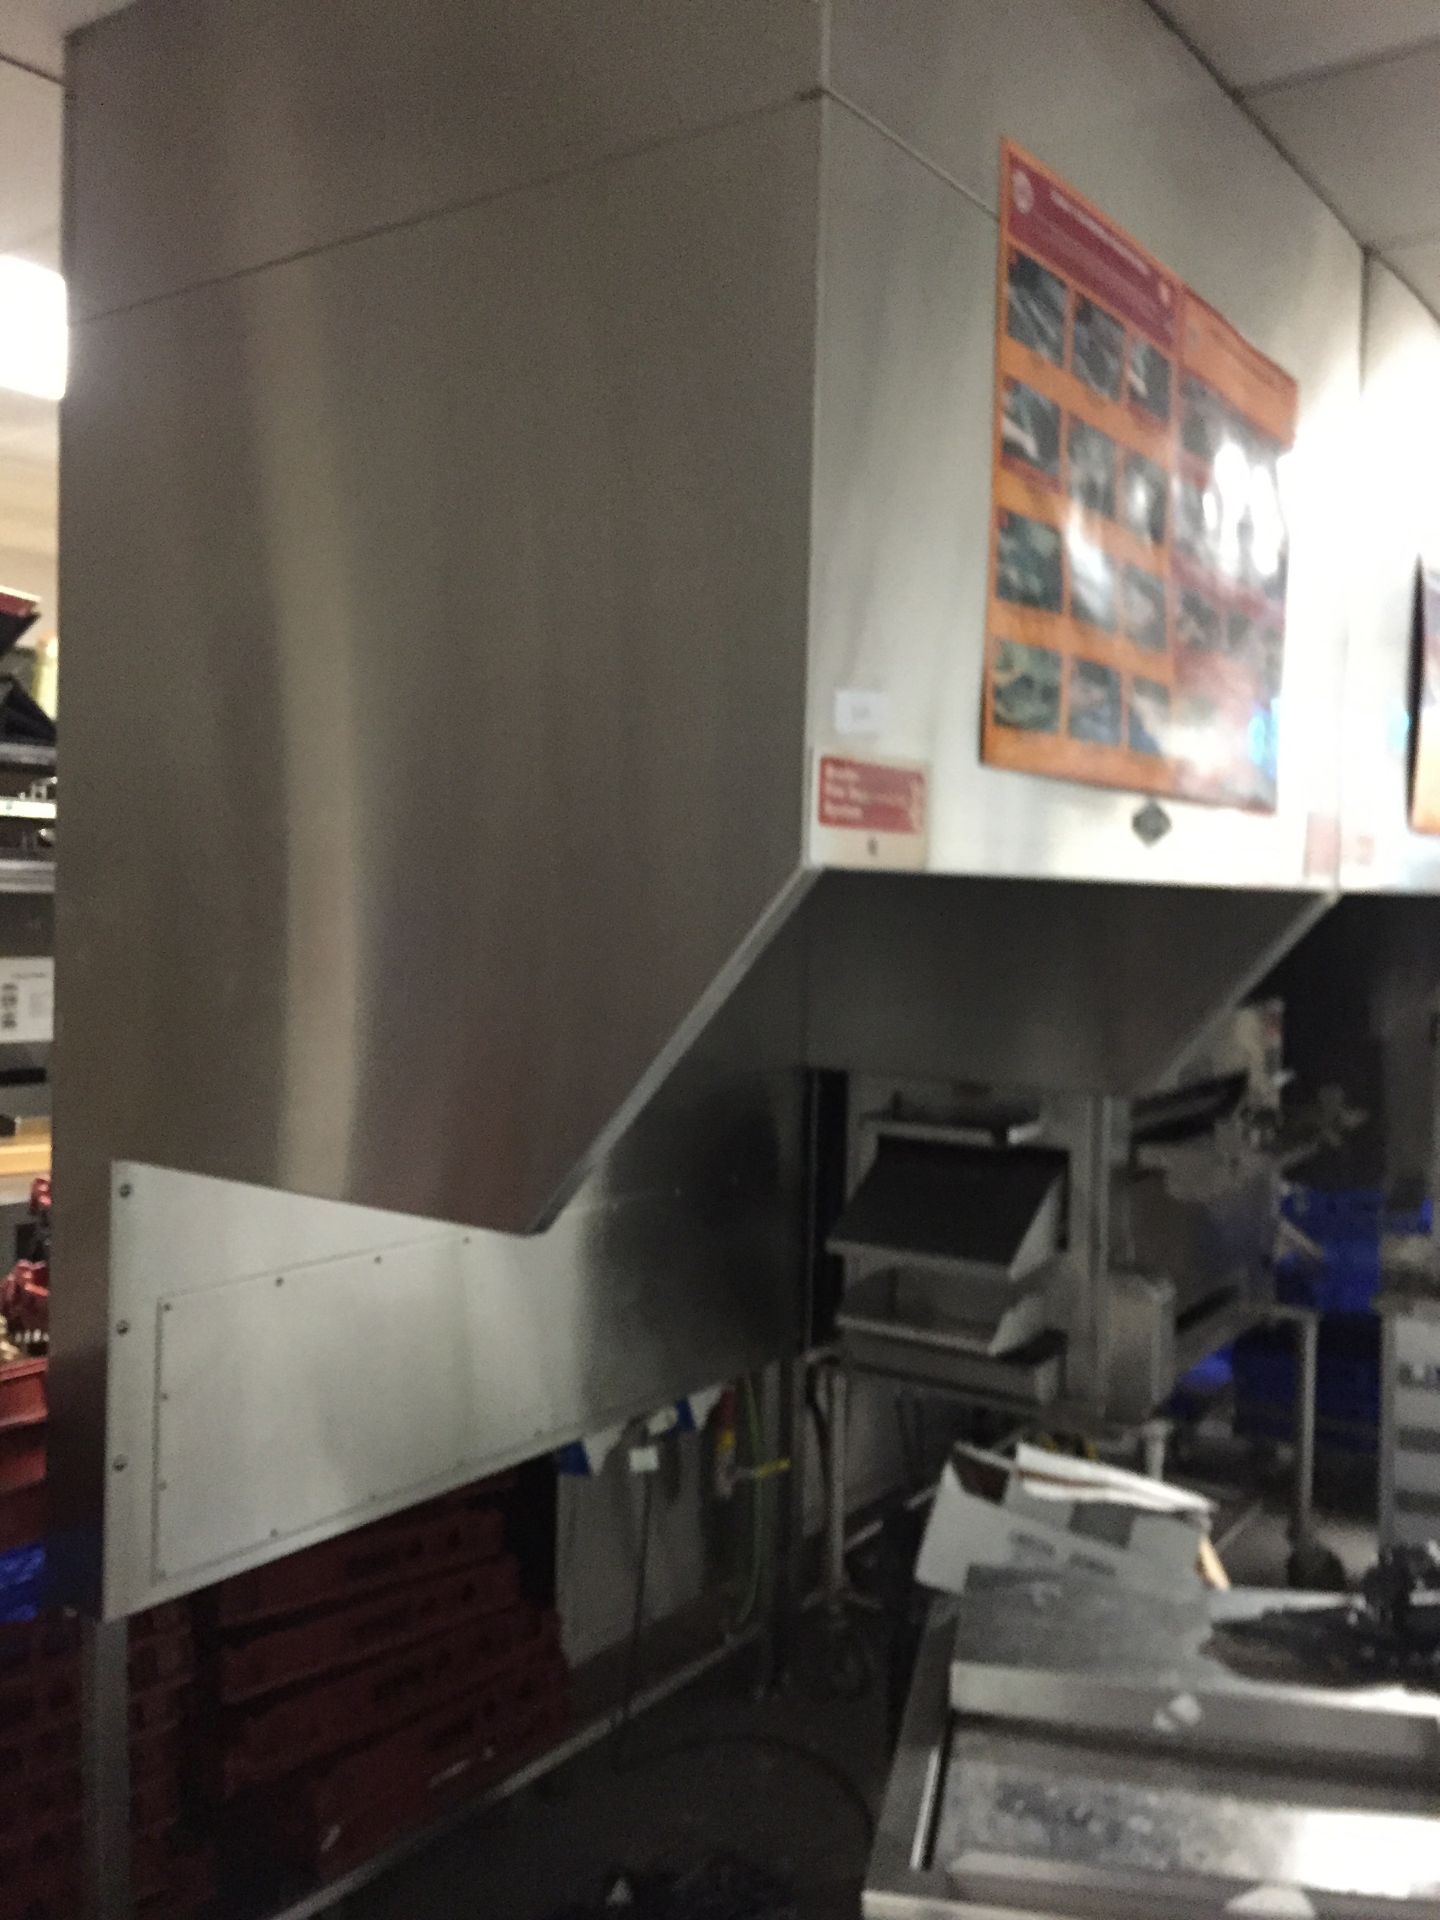 1 x Gaylord Stainless Steel Commercial Extractor Hood - Dimensions H257 x W153cm x D109 cm - Ref 263